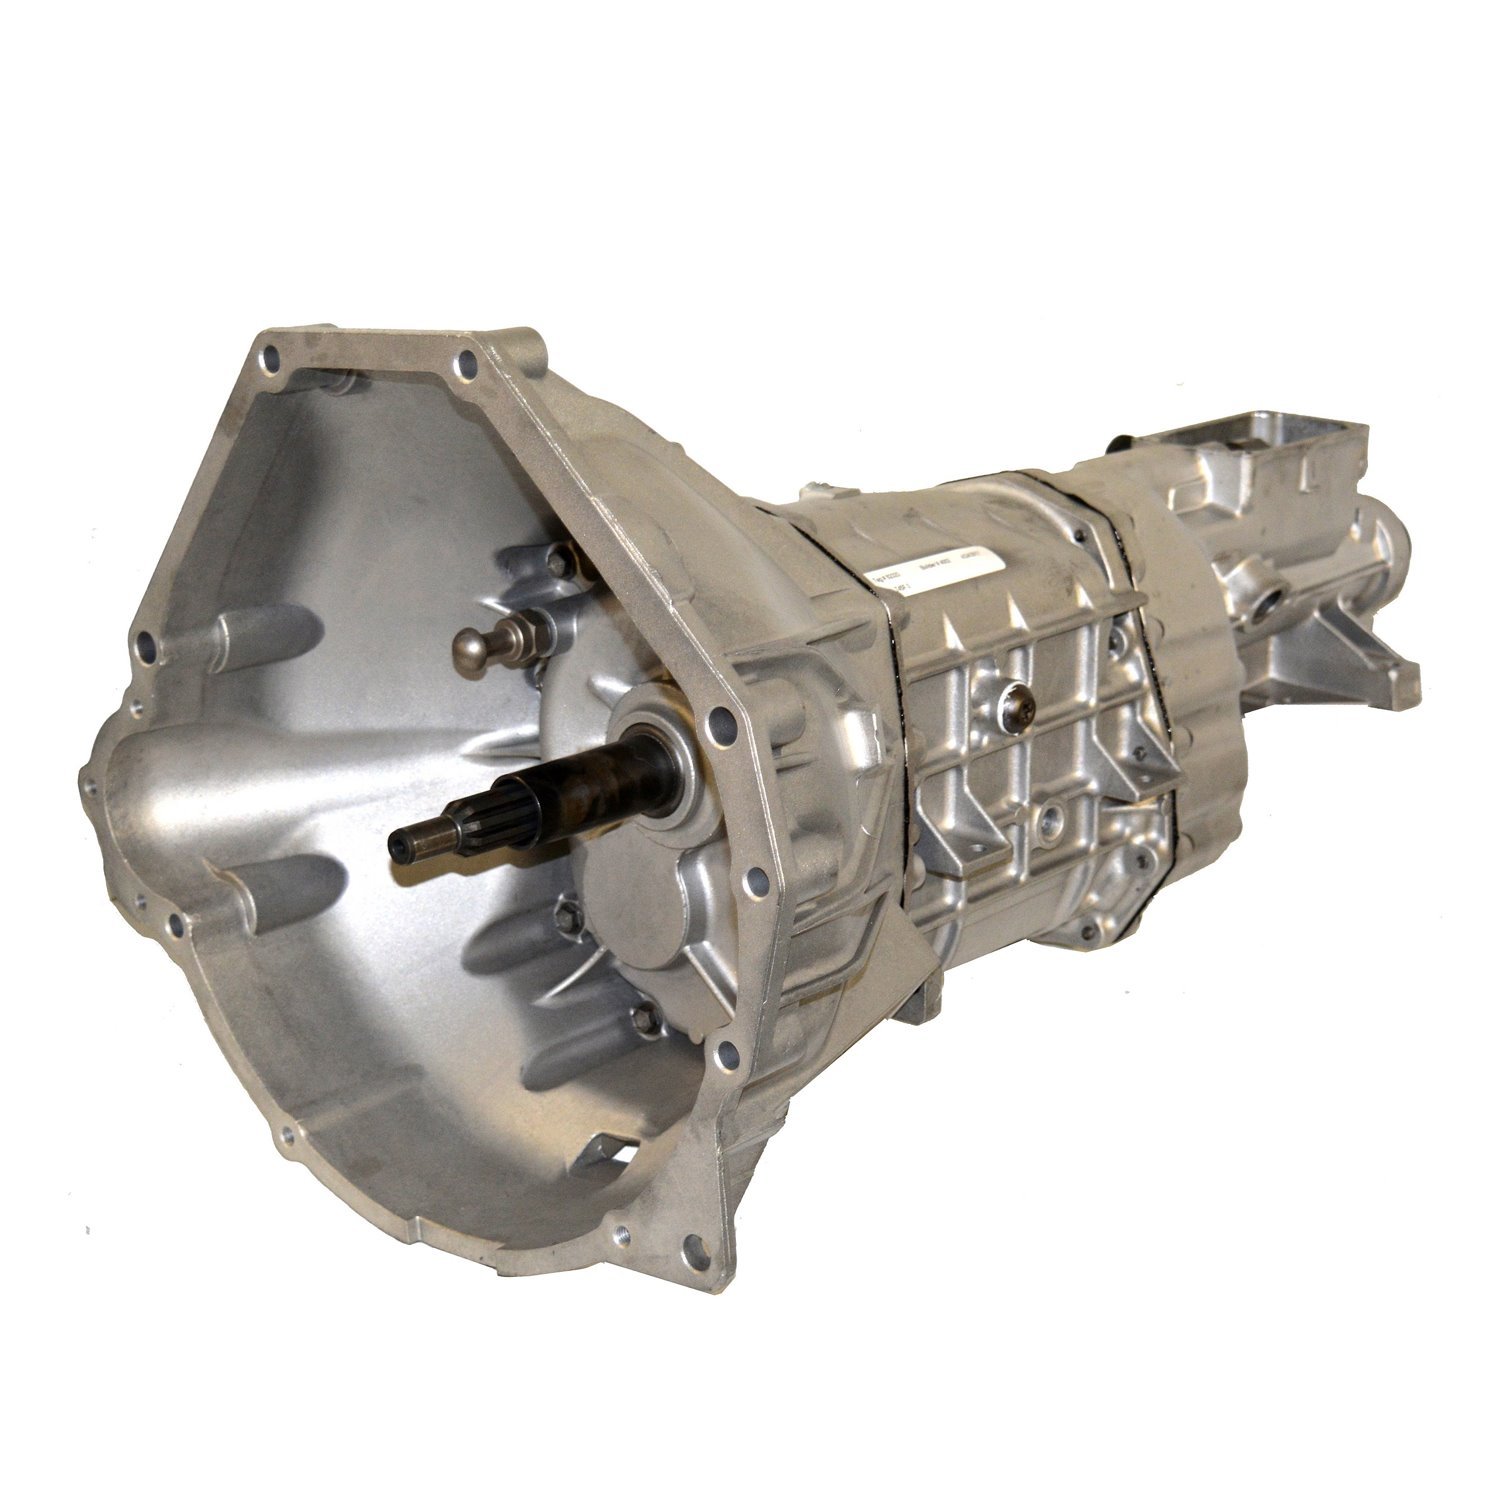 Remanufactured FM145 Manual Transmission for Ford 96-98 Mustang